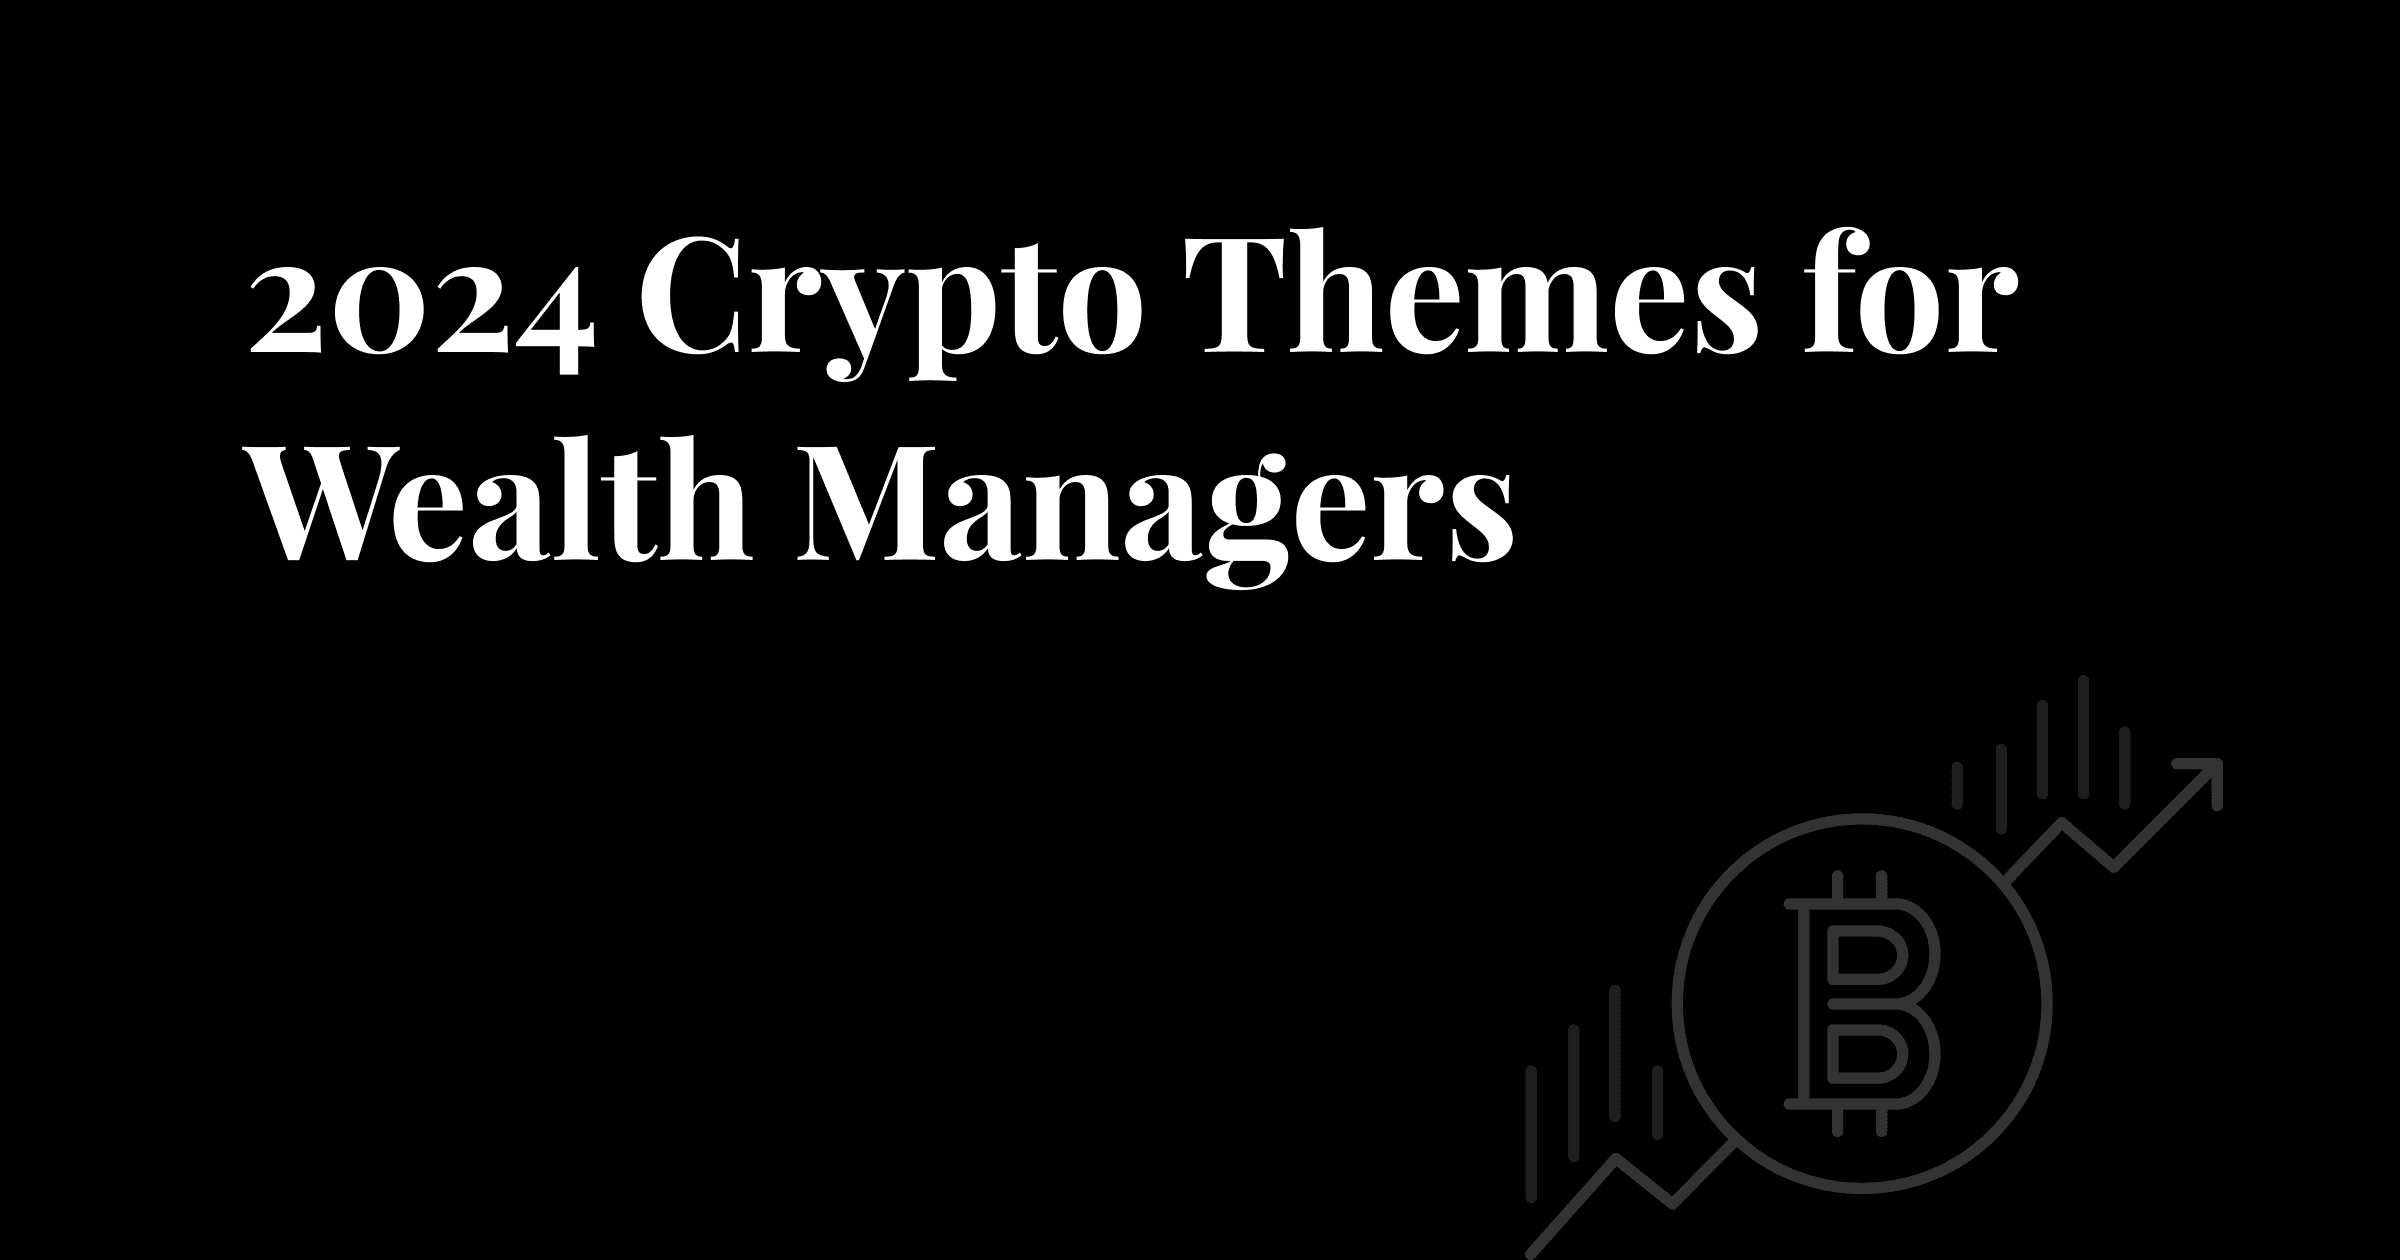 Article image - 2024 Crypto Themes for Wealth Managers 